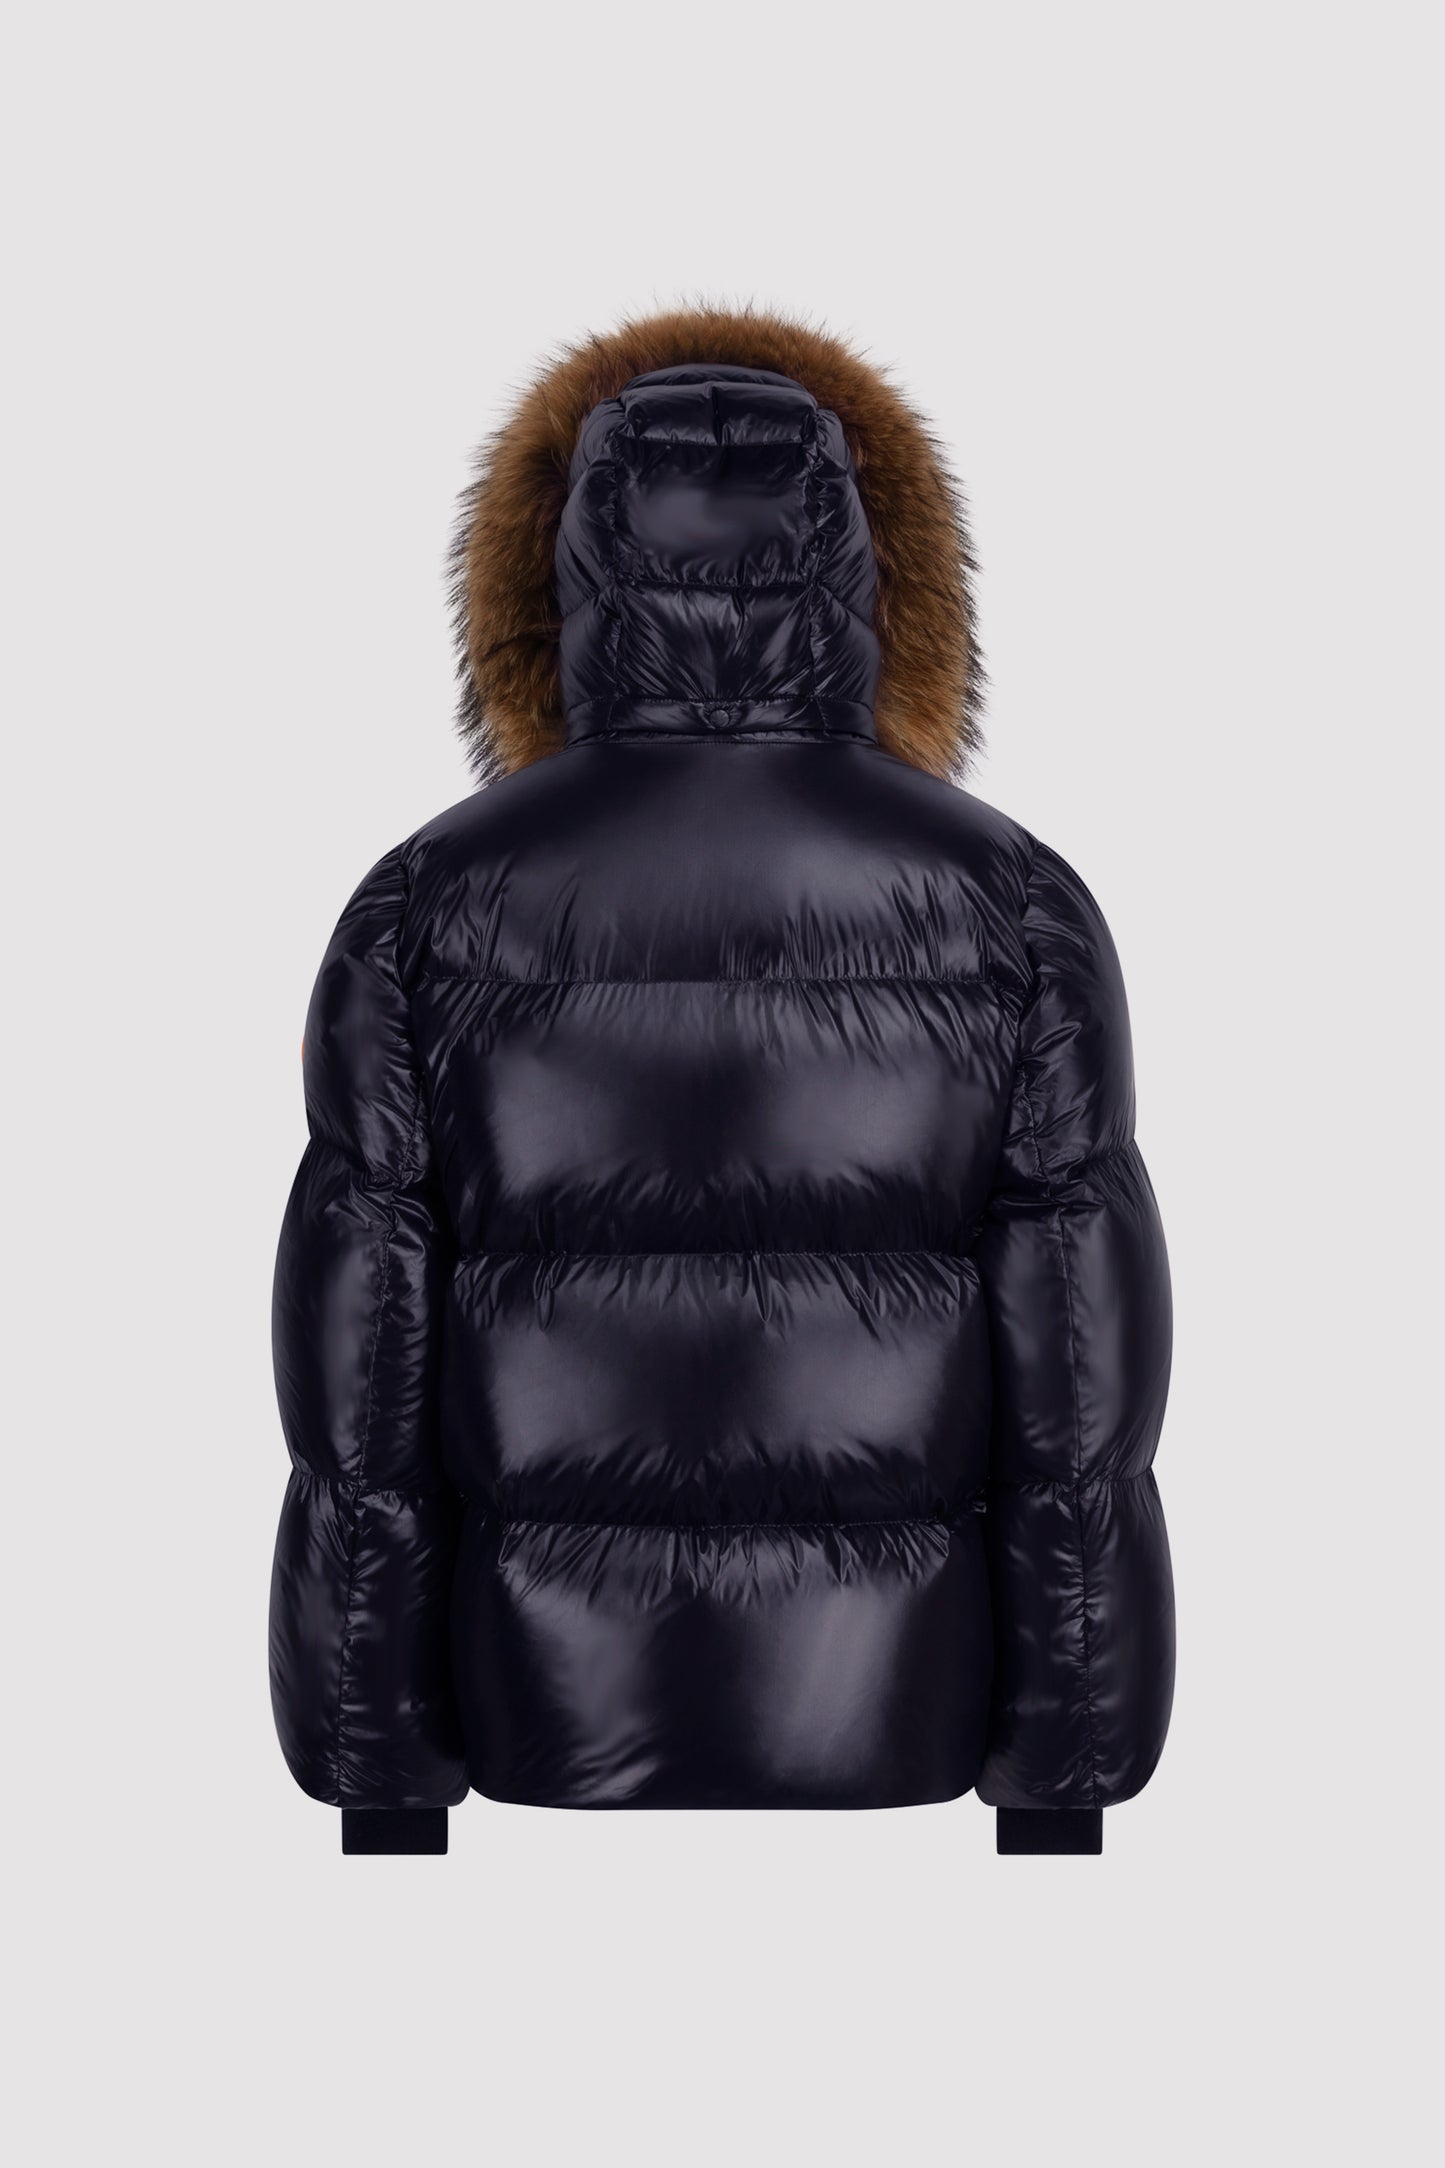 Women's Puffer with Fur in Navy